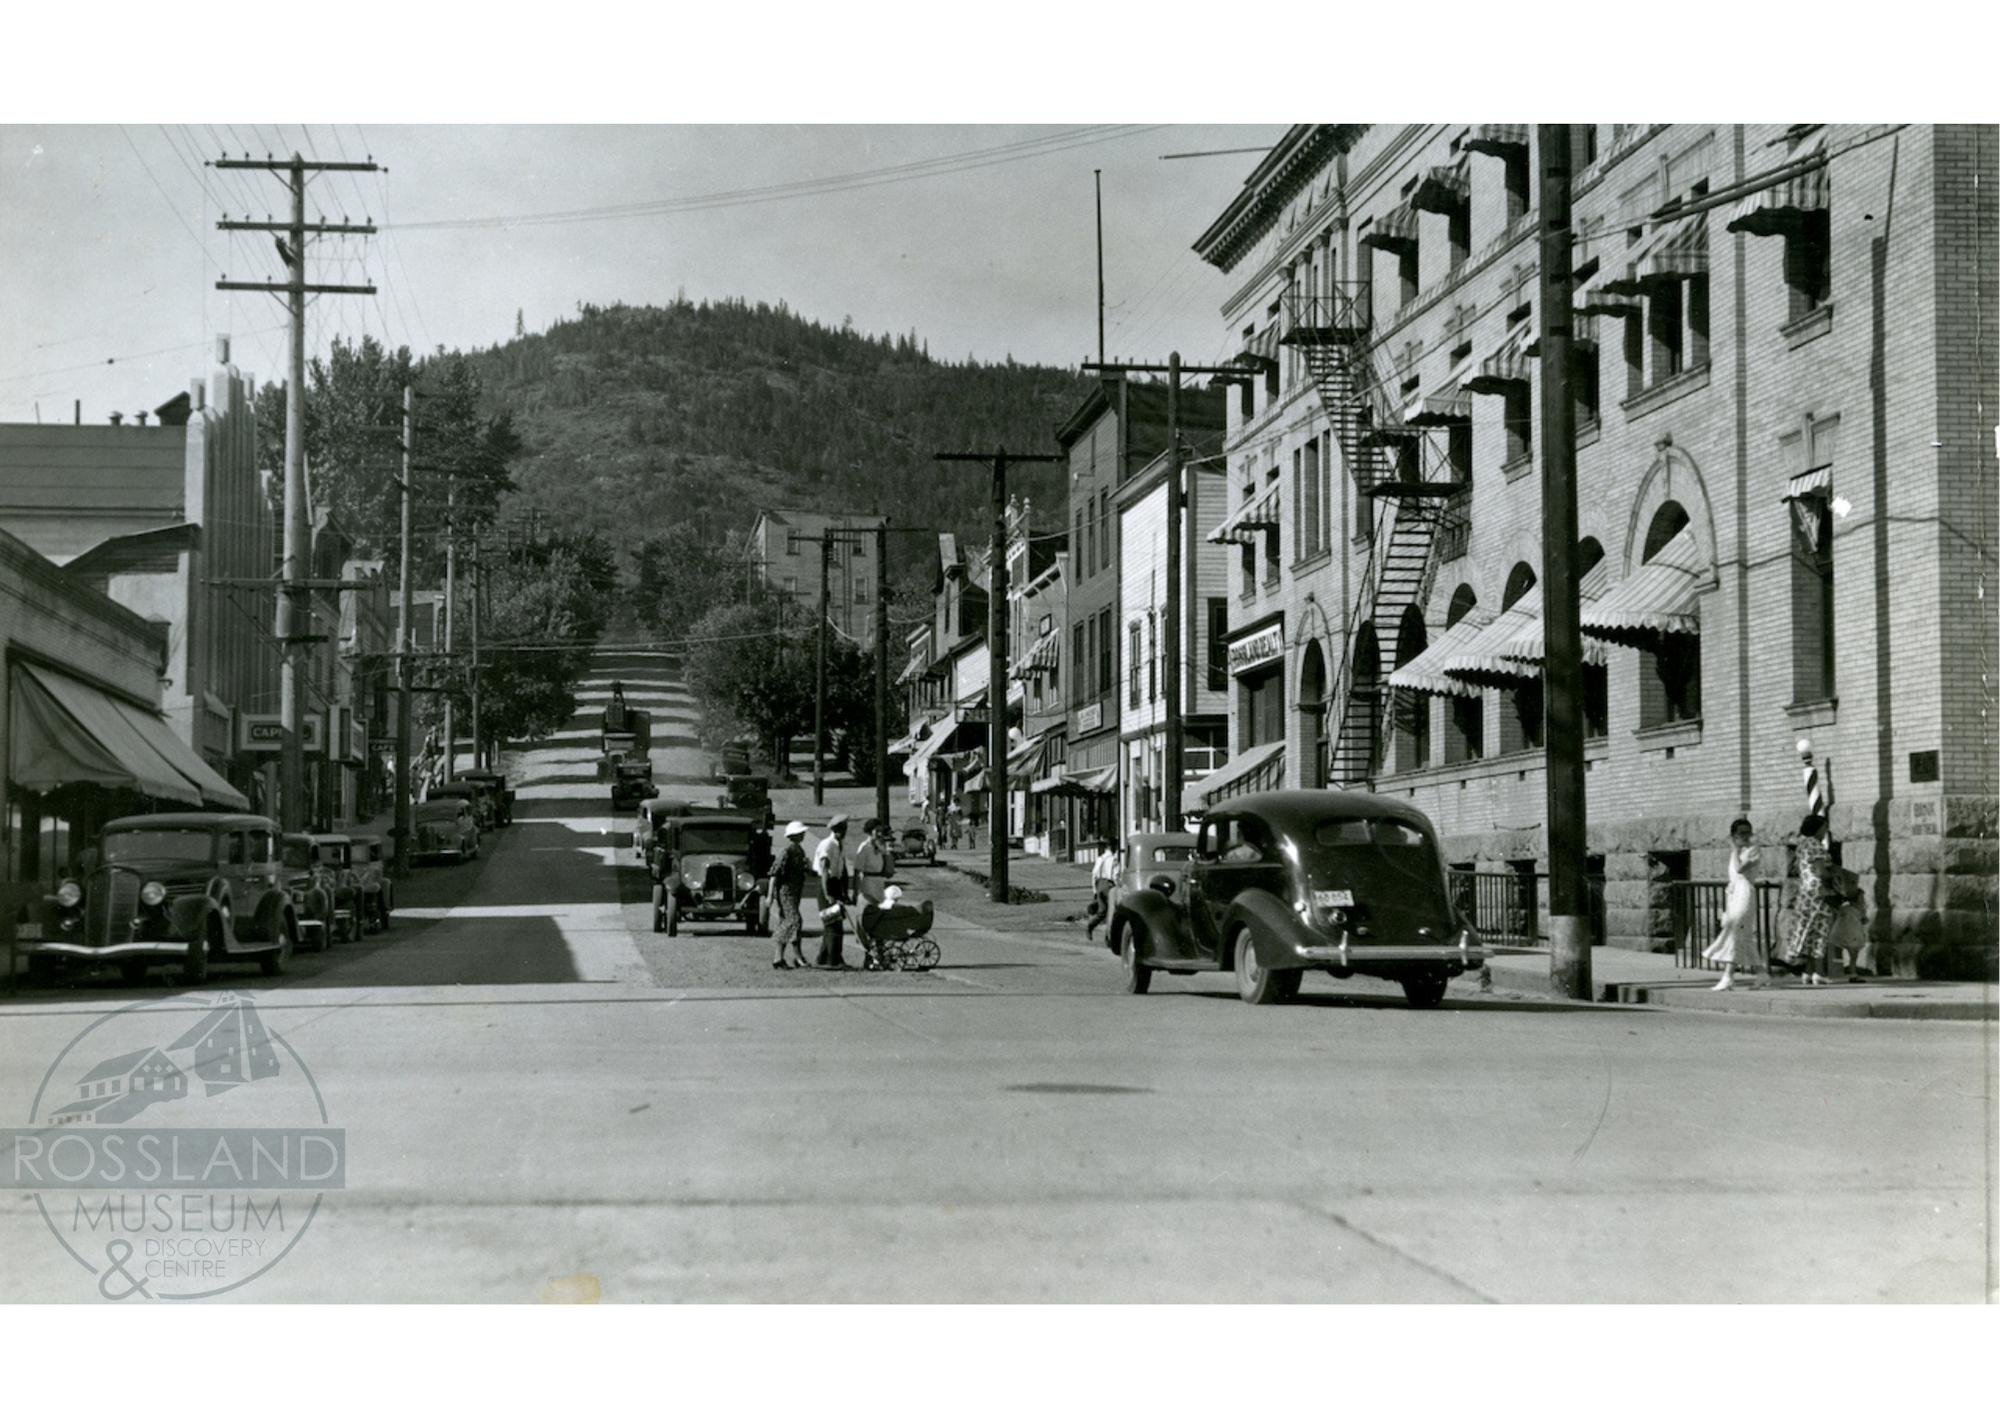   2315.0057 : Washington Street, circa 1930. The Bank of Montreal is on the right. 